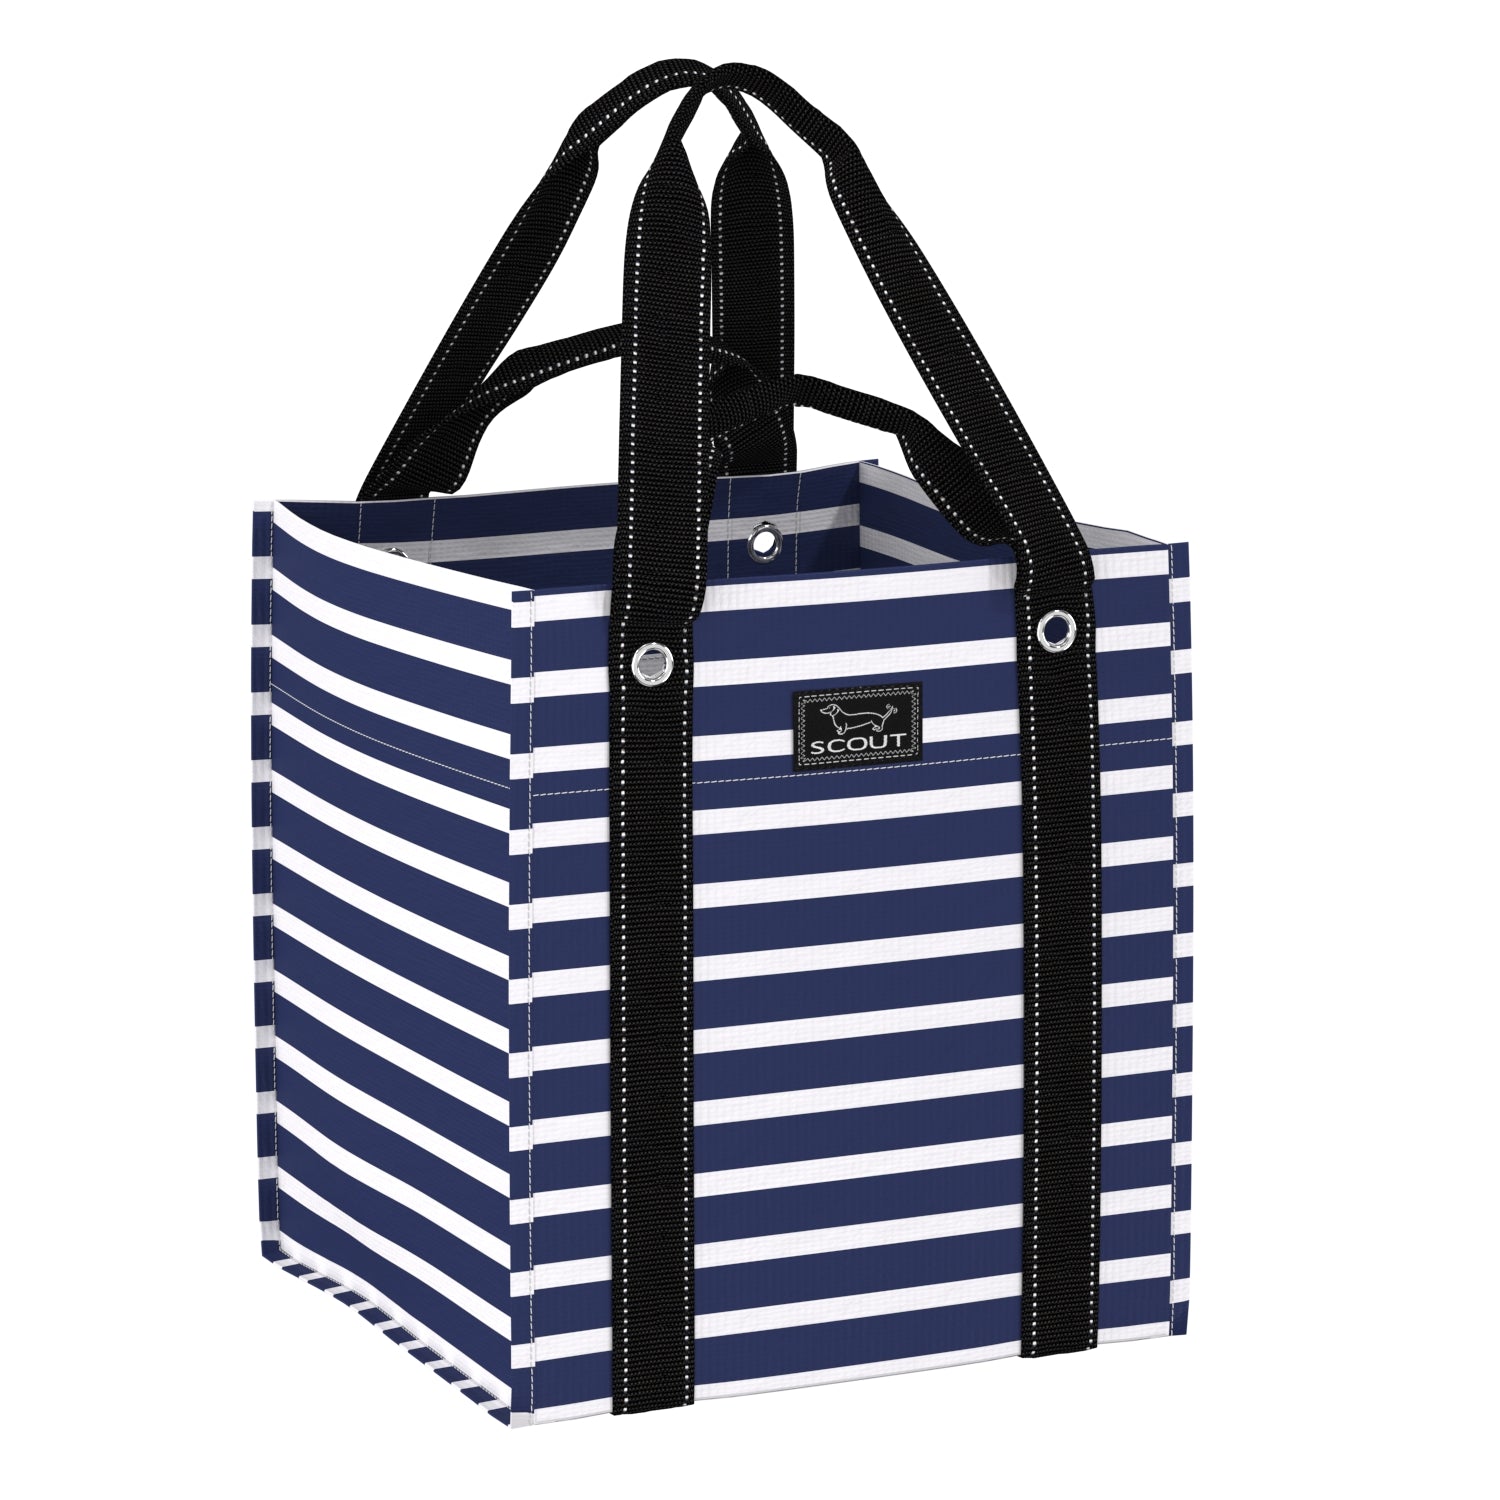 Scout Bags | Bagette Market Tote